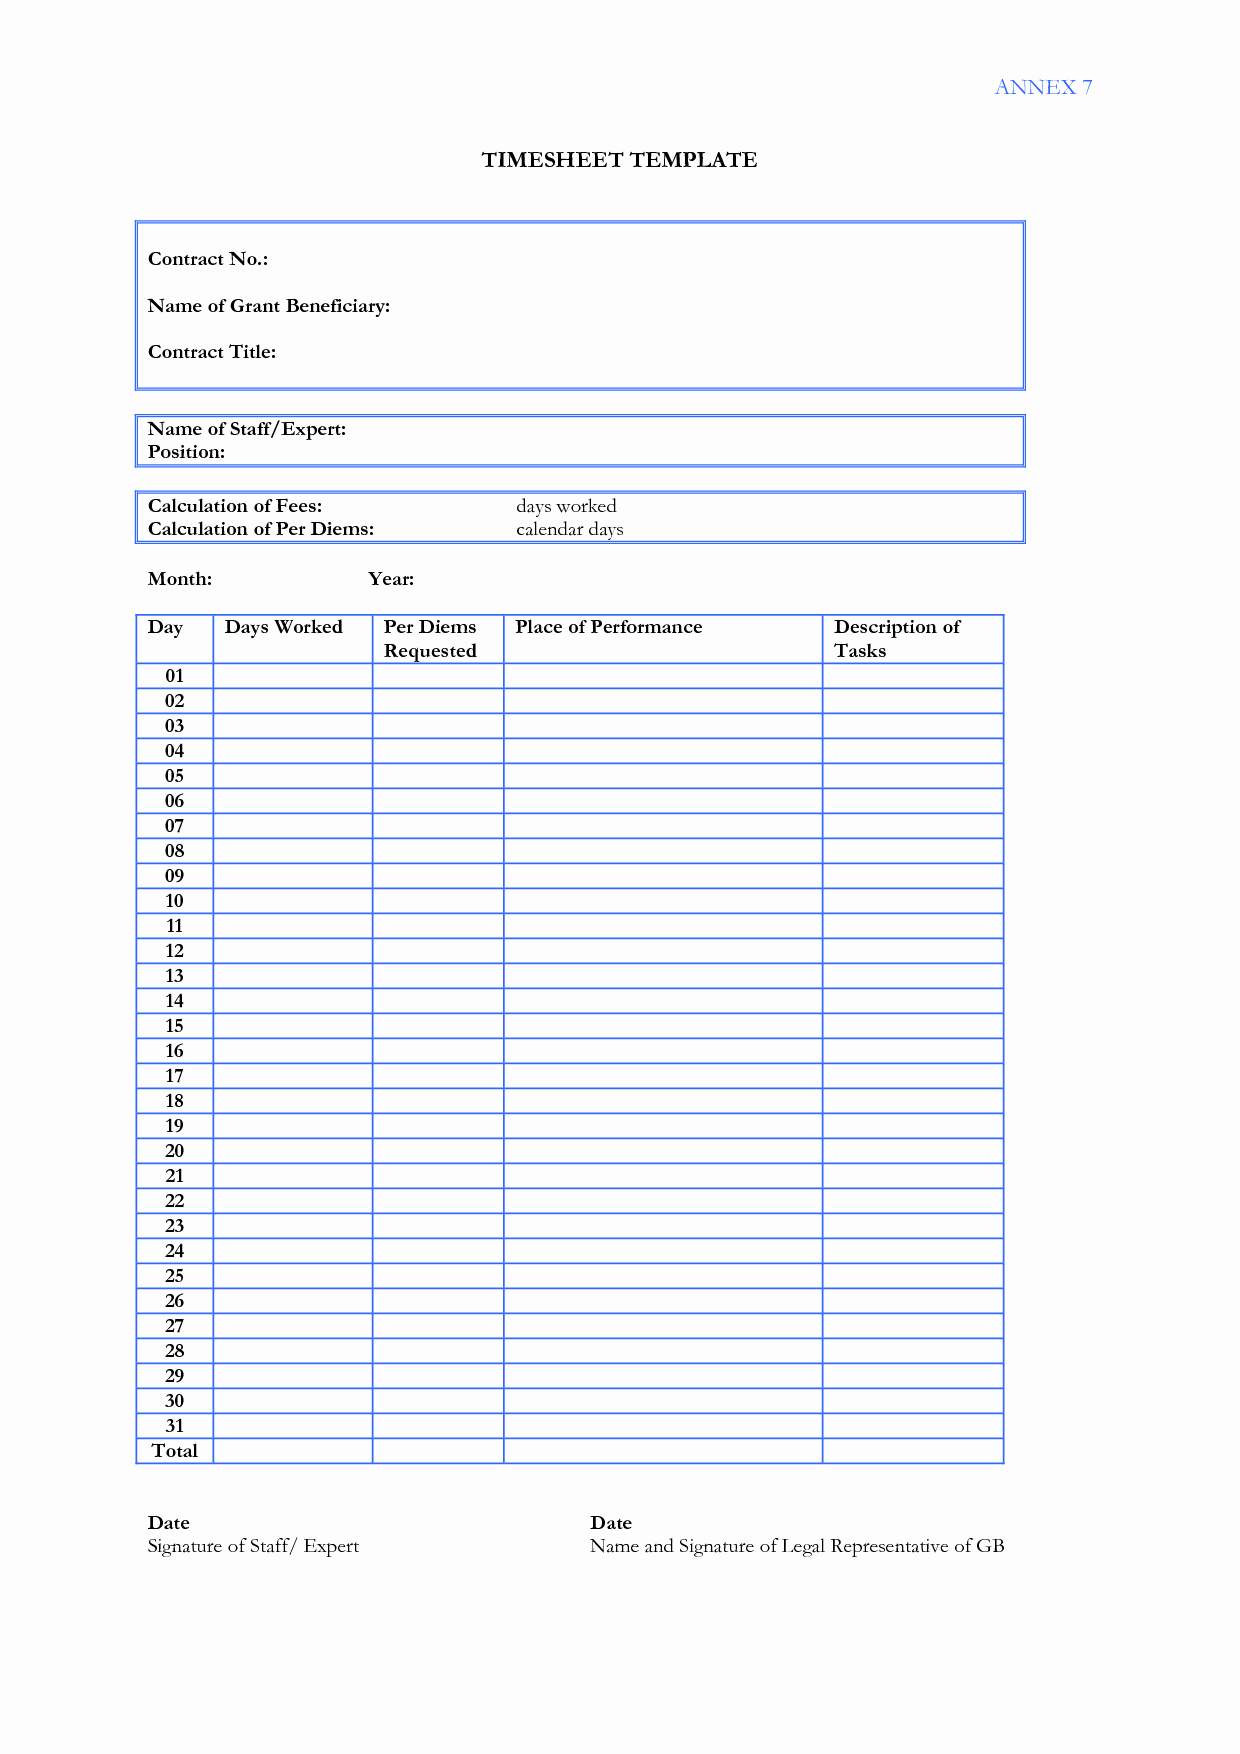 010 Timesheet Template Free Printable Of Best Time Sheets Templates - Timesheet Template Free Printable